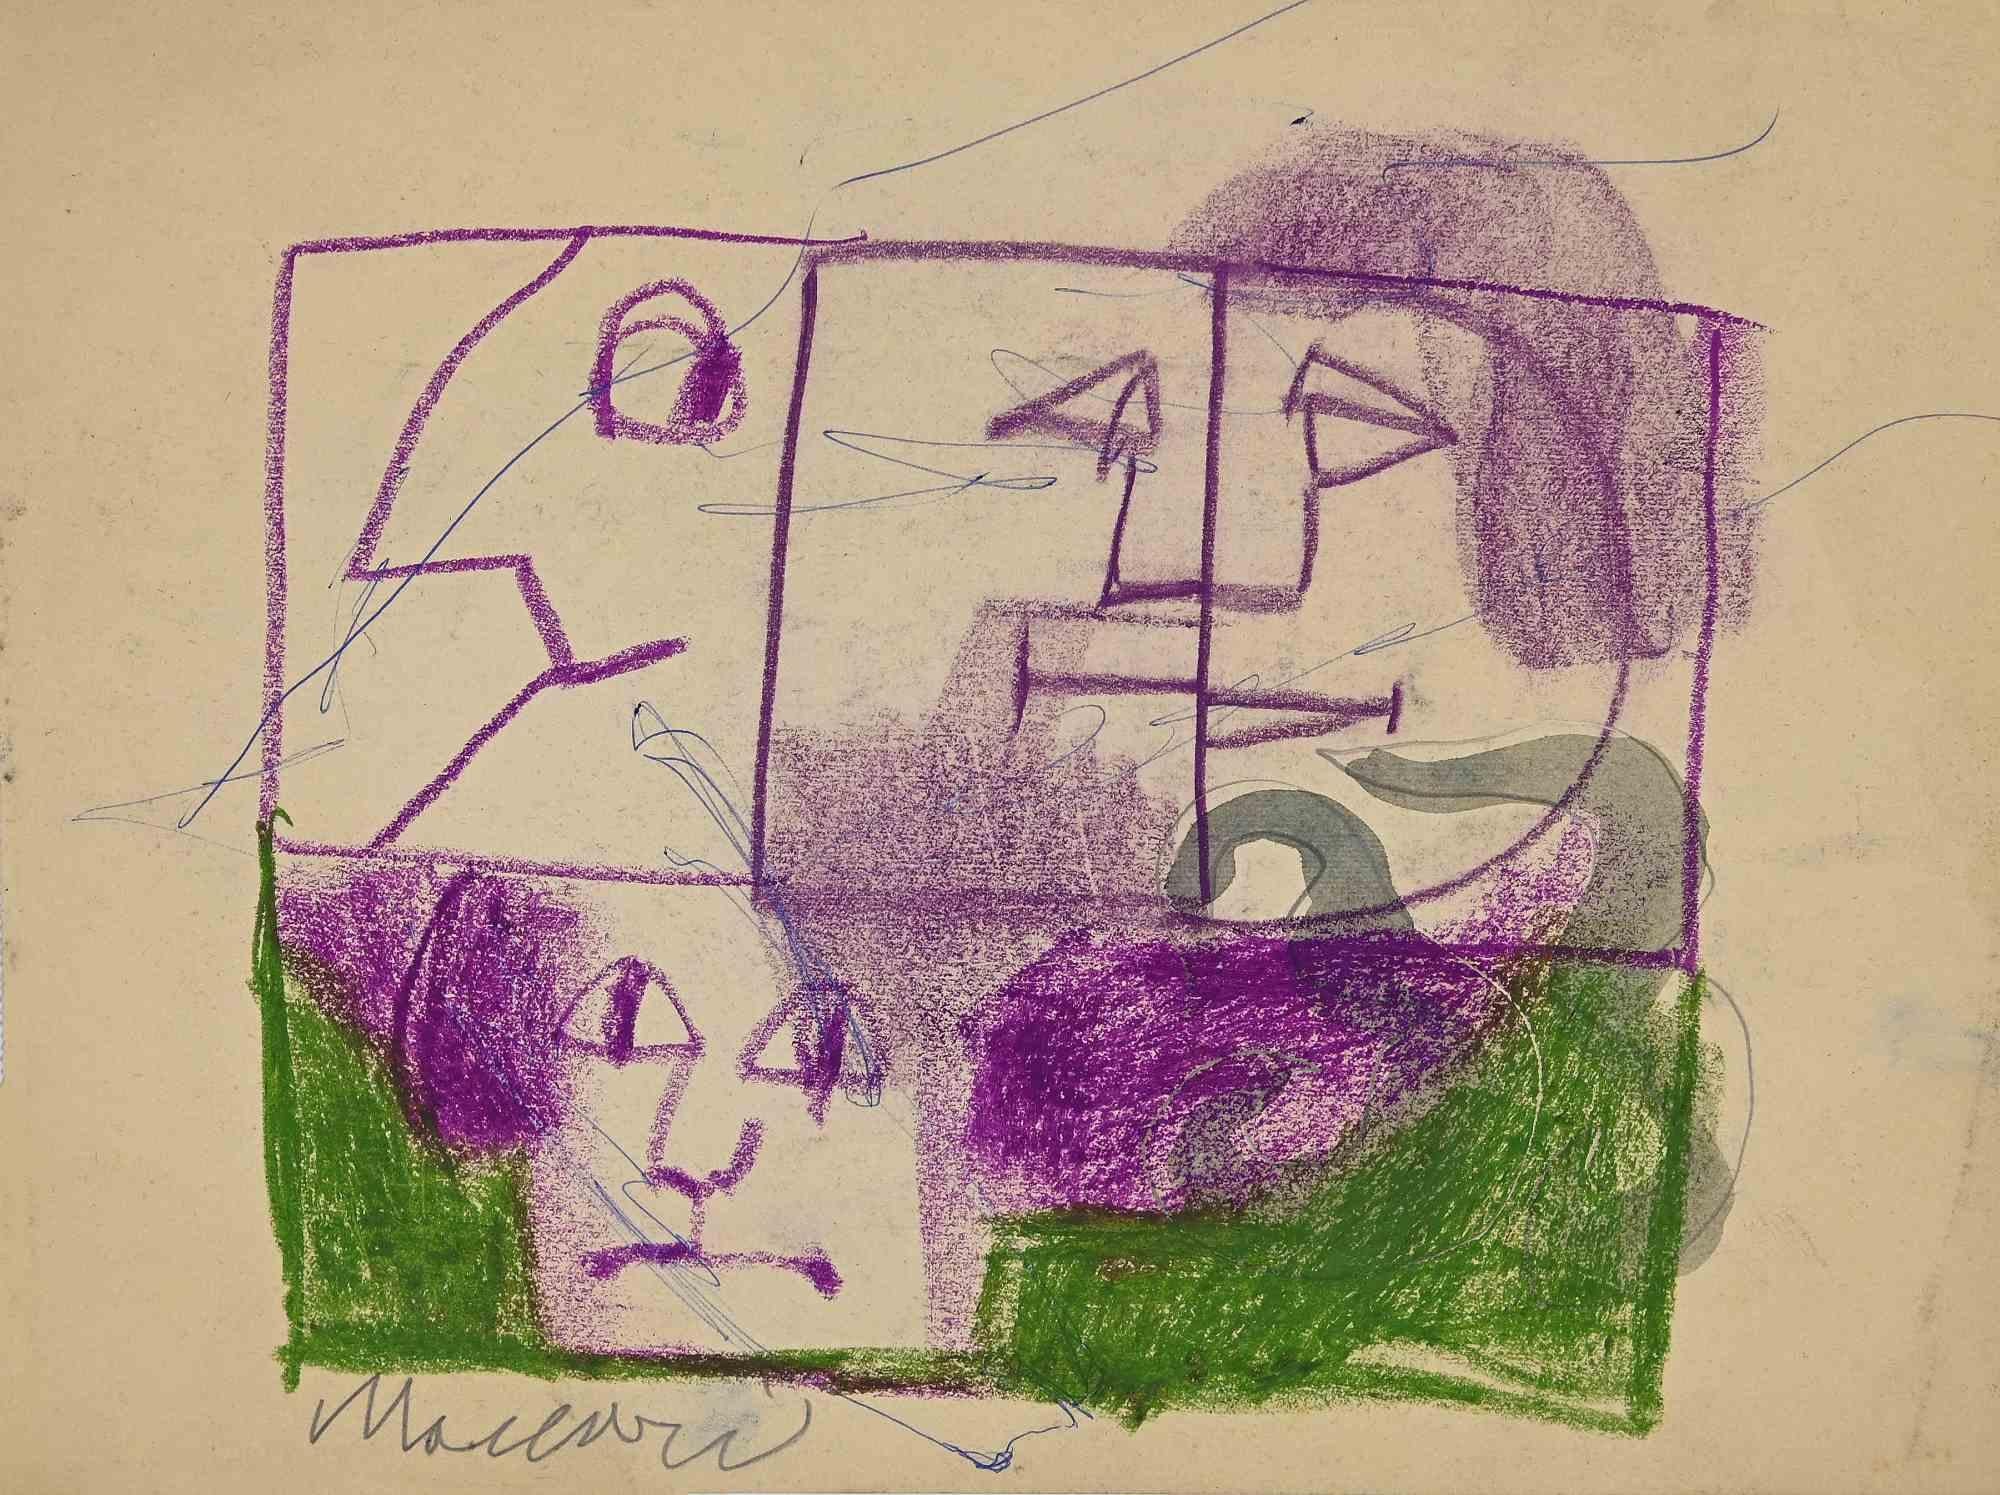 Profiles is an original Oil Pastel realized by Mino Maccari in mid-20th century.

Good condition on a yellowed paper.

Hand-signed by the artist with pencil.

Mino Maccari (1898-1989) was an Italian writer, painter, engraver and journalist, winner